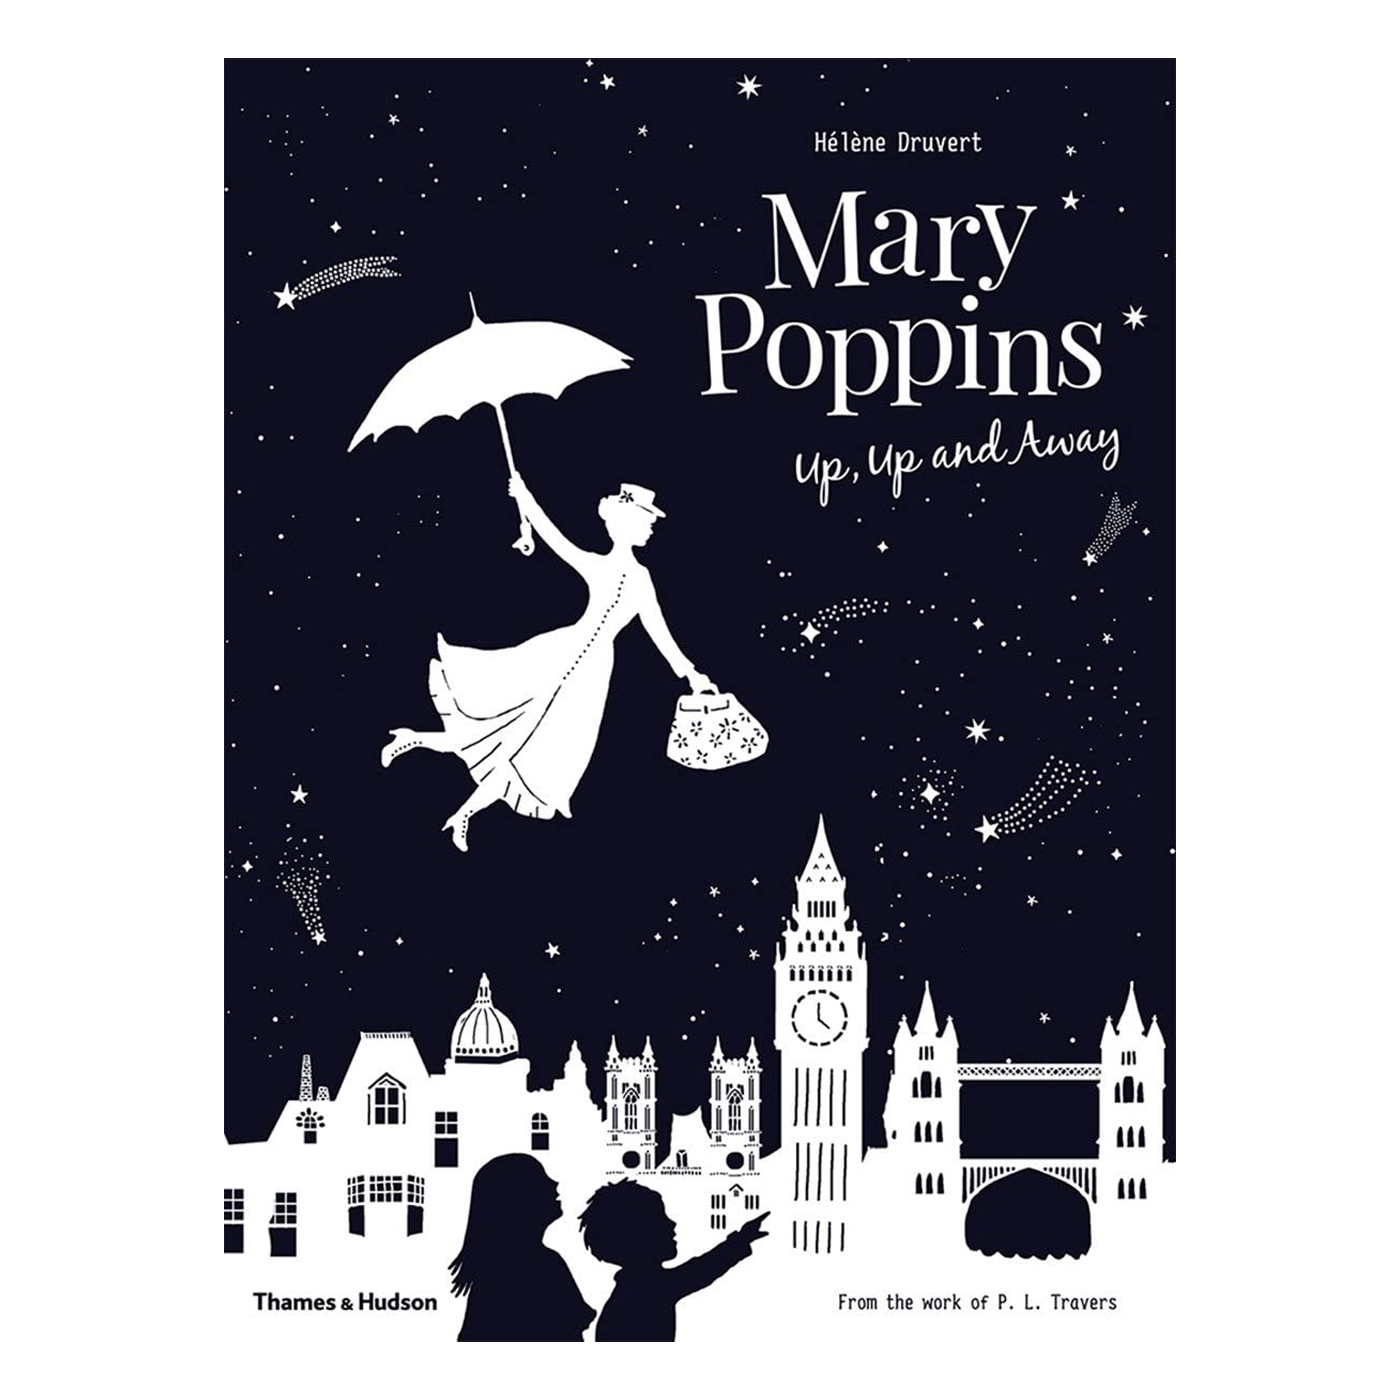  Mary Poppins Up, Up and Away